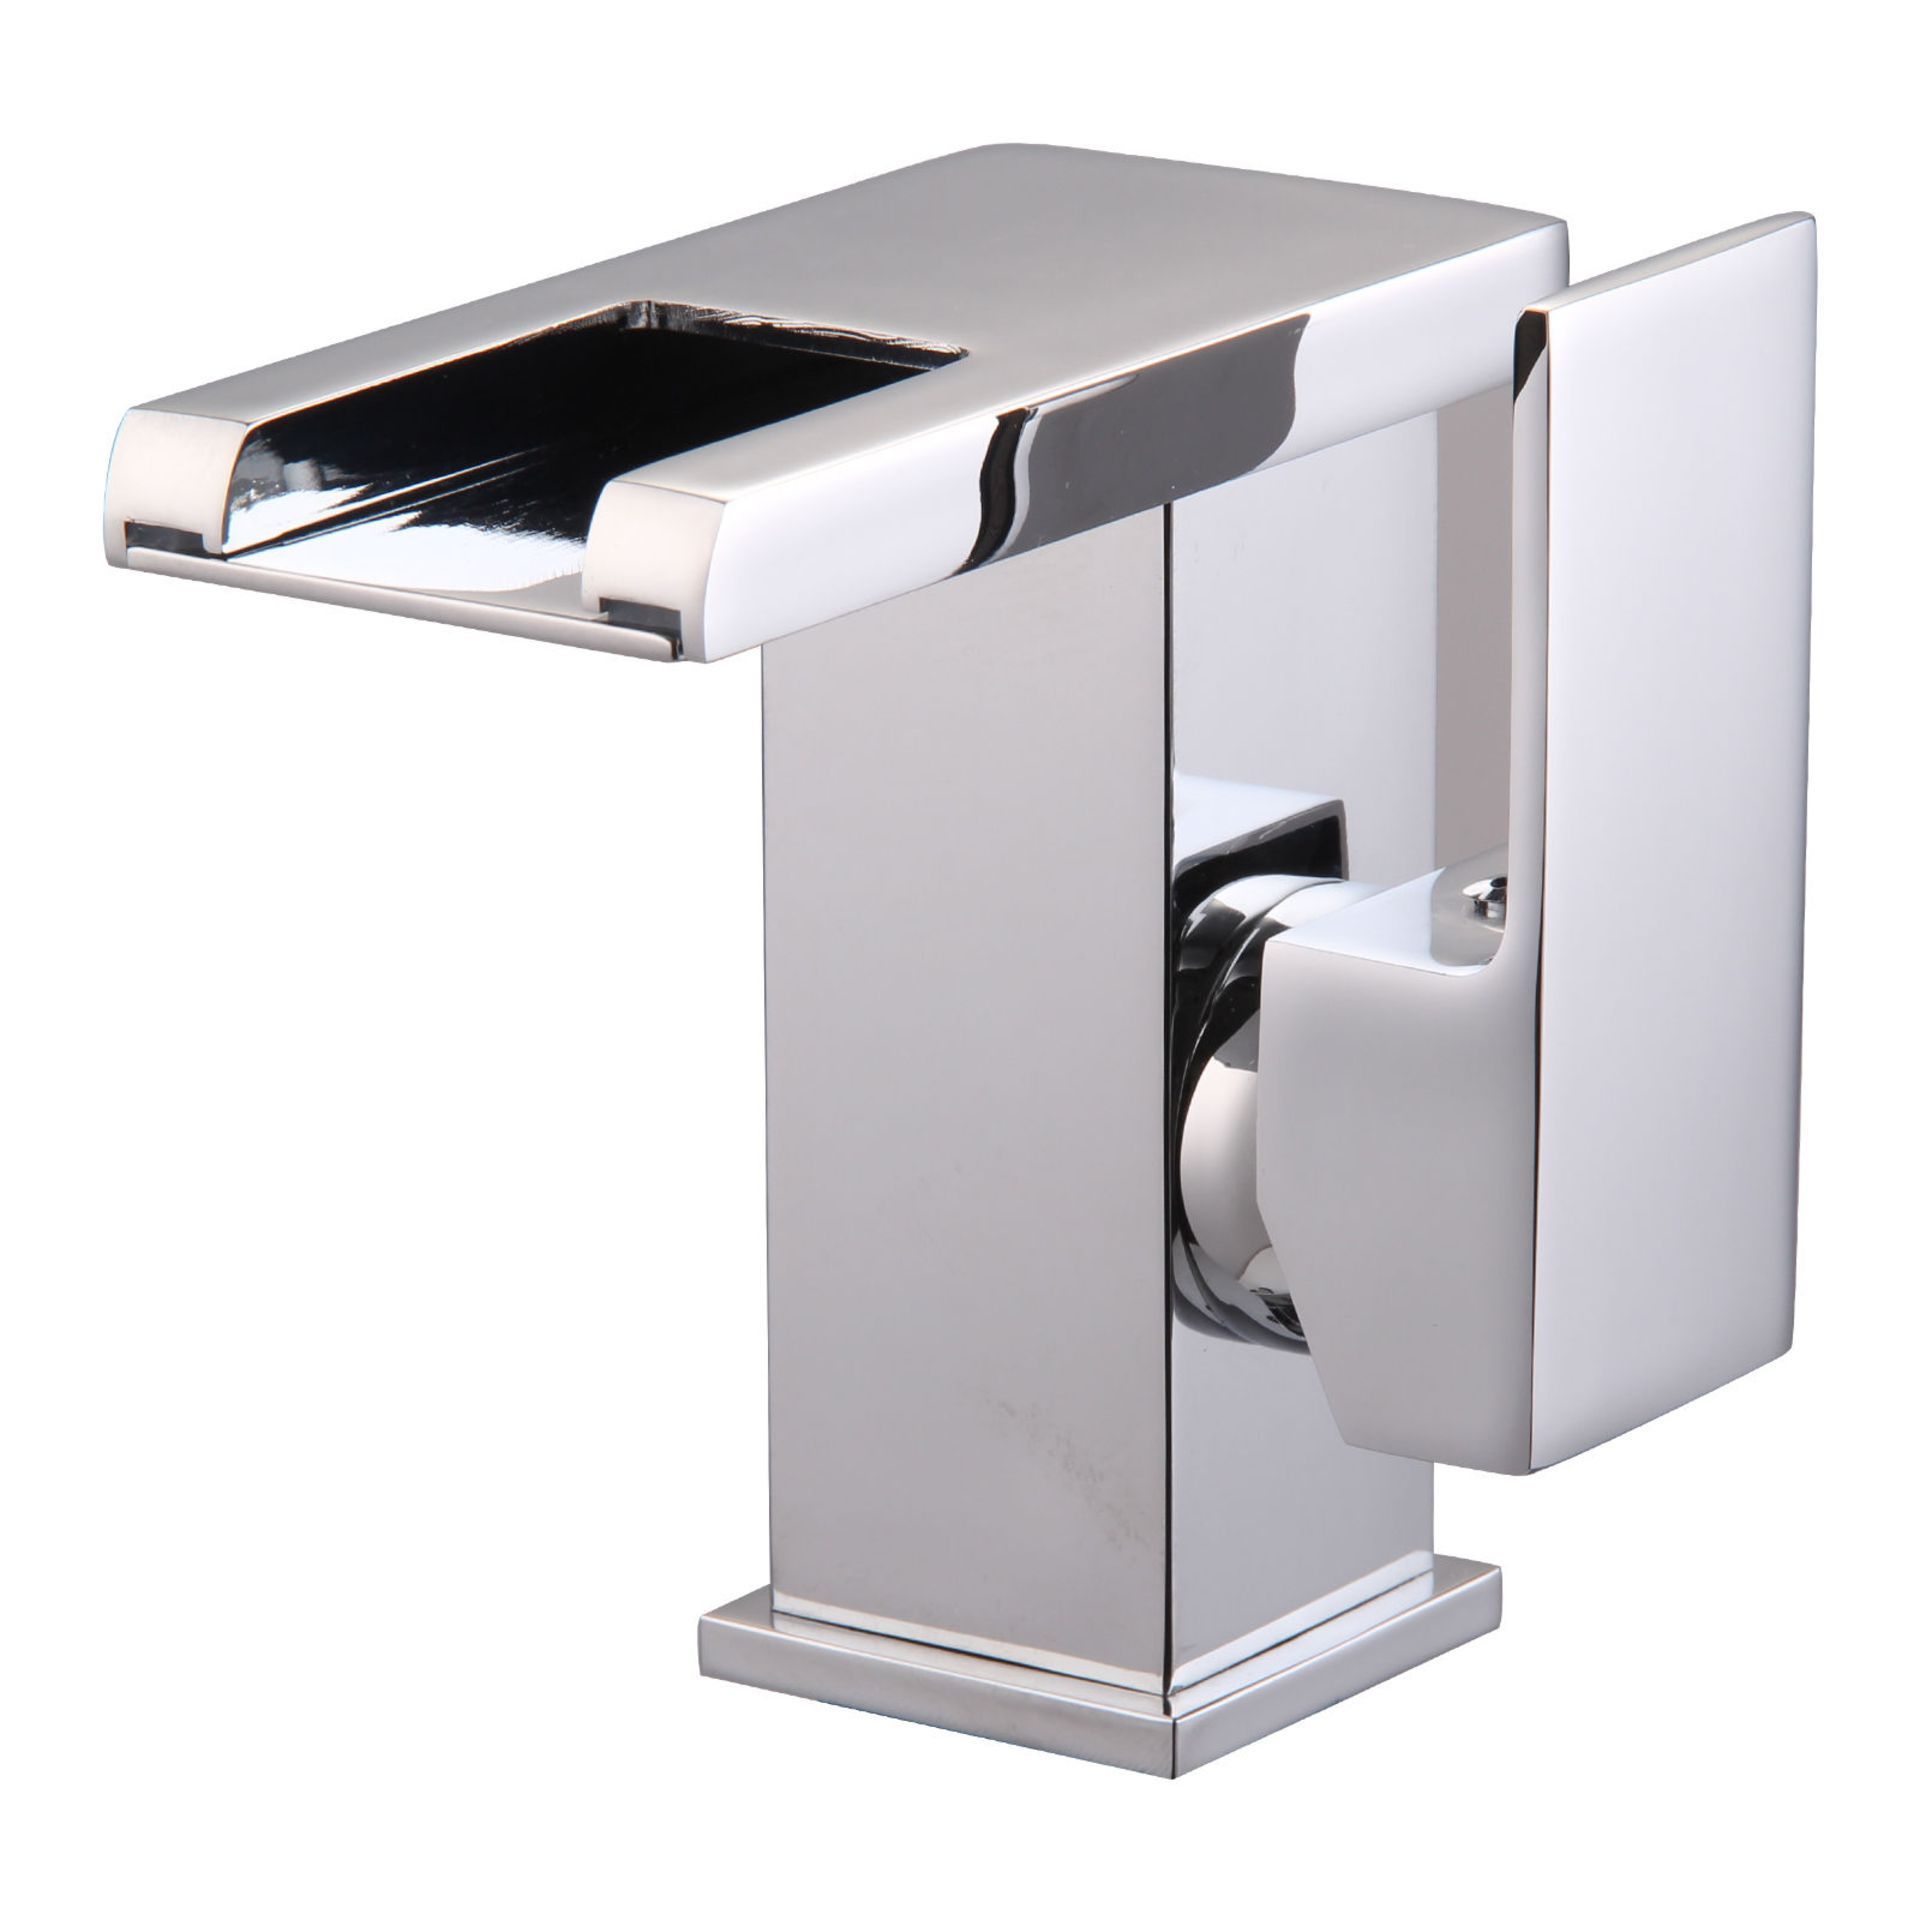 New Led Waterfall Bathroom Basin Mixer Tap. RRP £229.99. Easy To Install And Clean. All Coppe... - Image 2 of 2